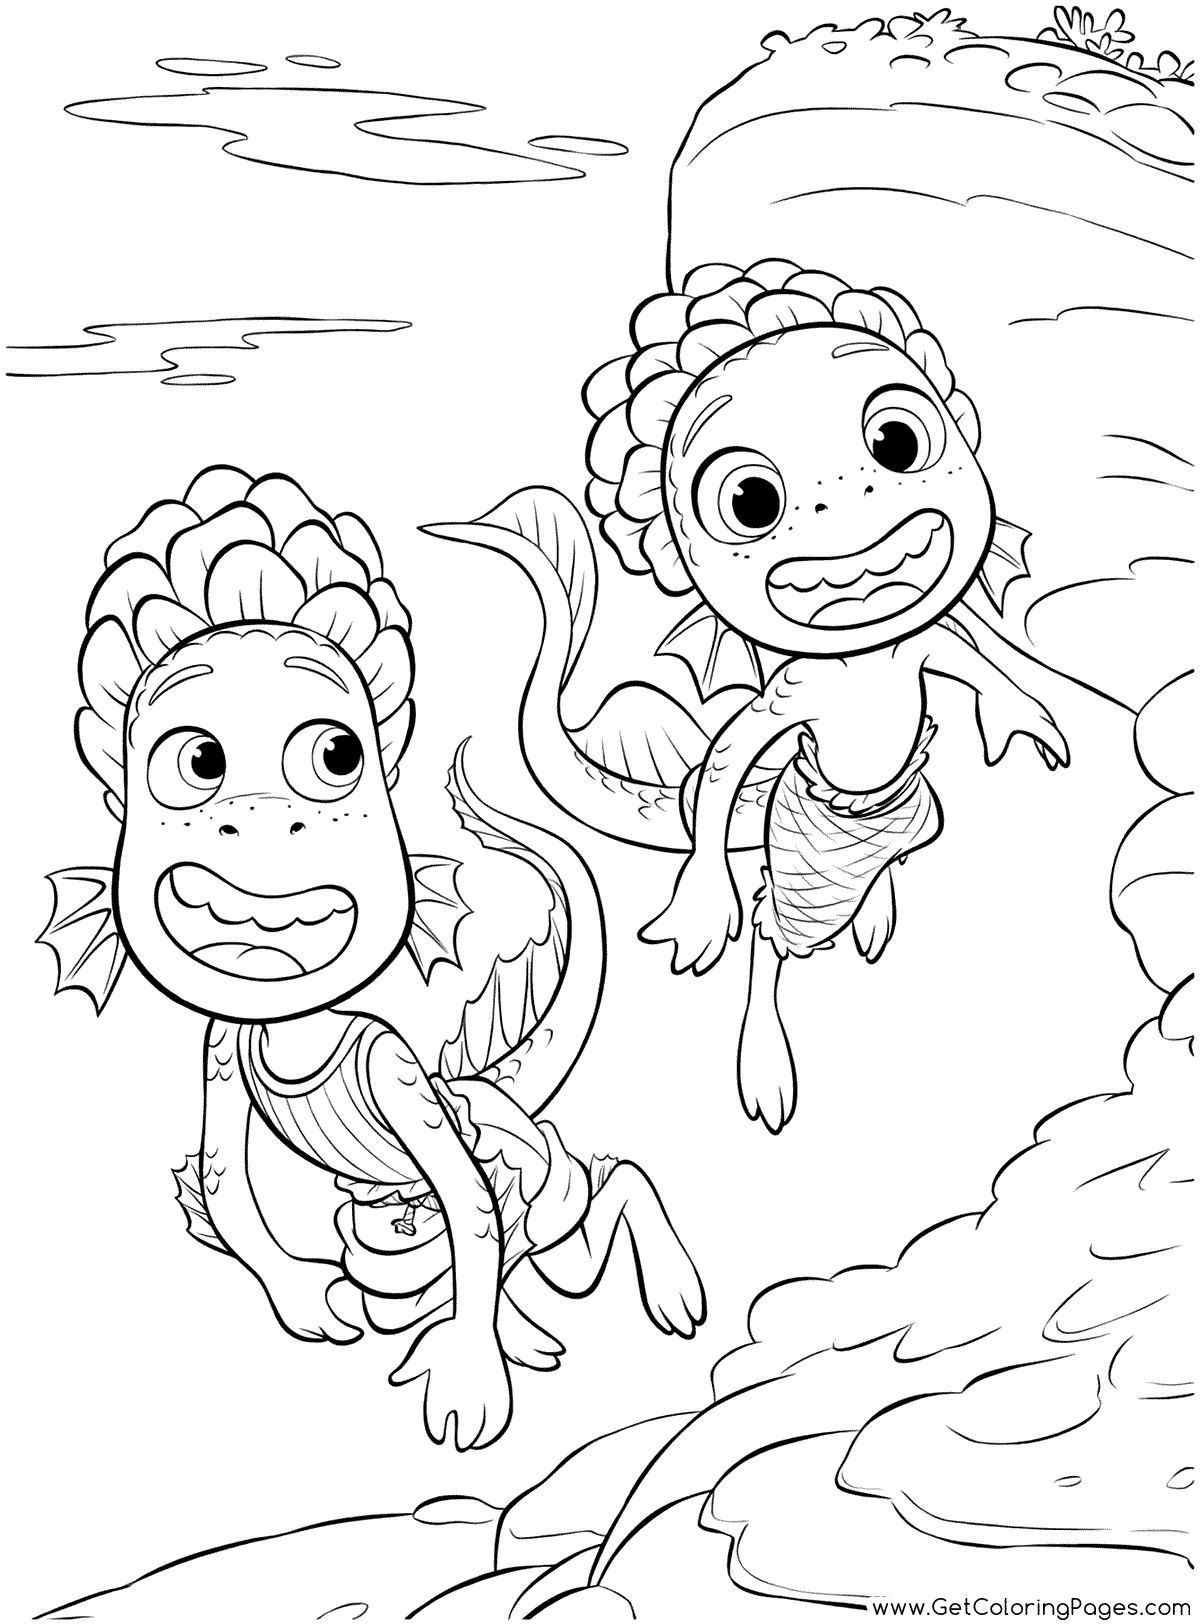 Luca coloring pages